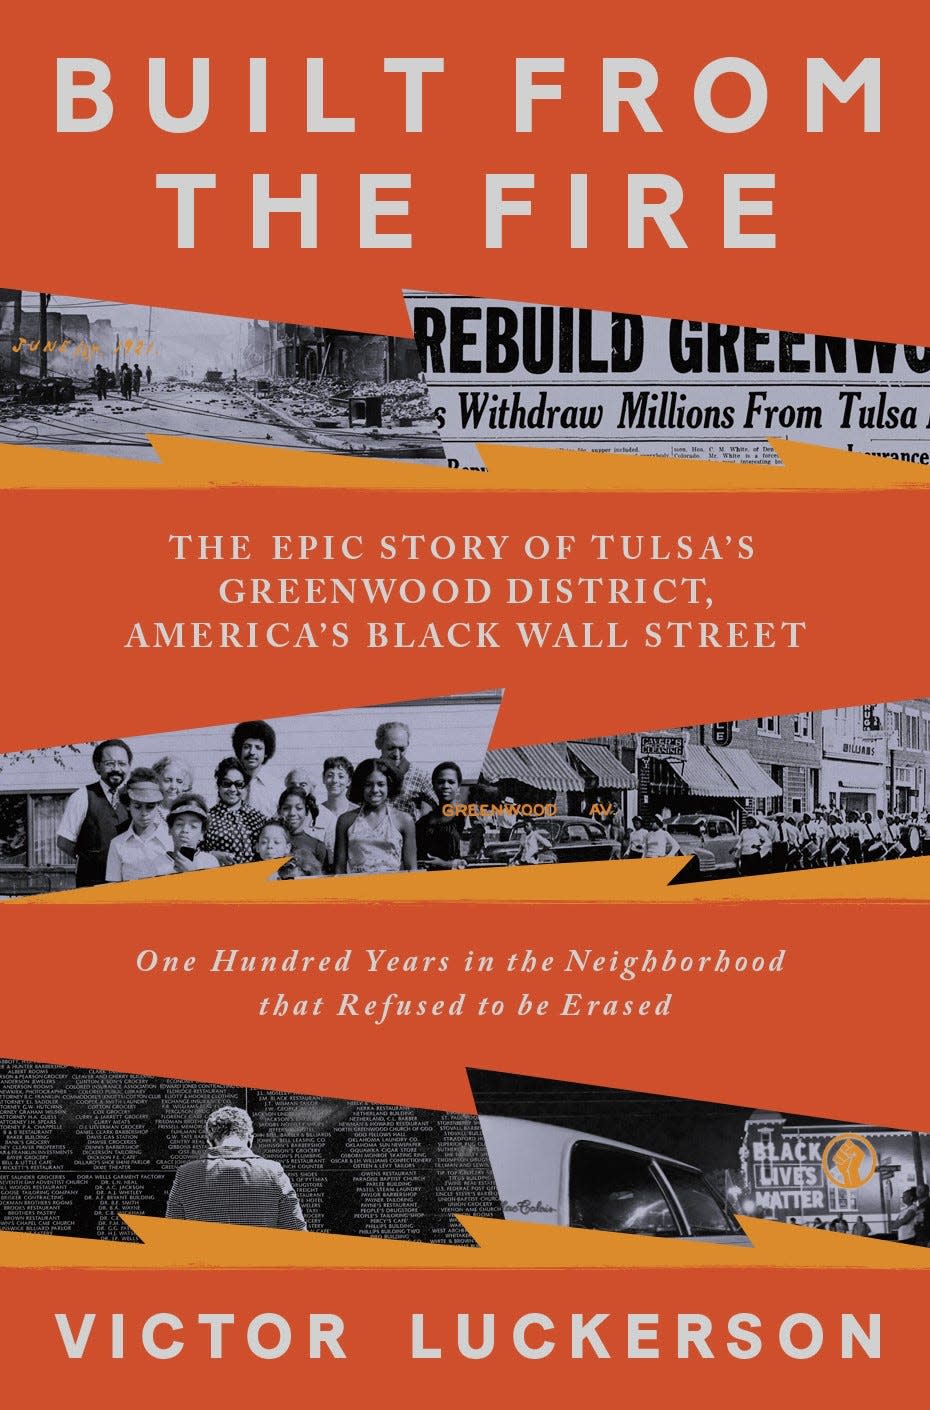 "Built From the Fire: The Epic Story of Tulsa's Greenwood District, America's Black Wall Street" was written by Montgomery native Victor Luckerson.